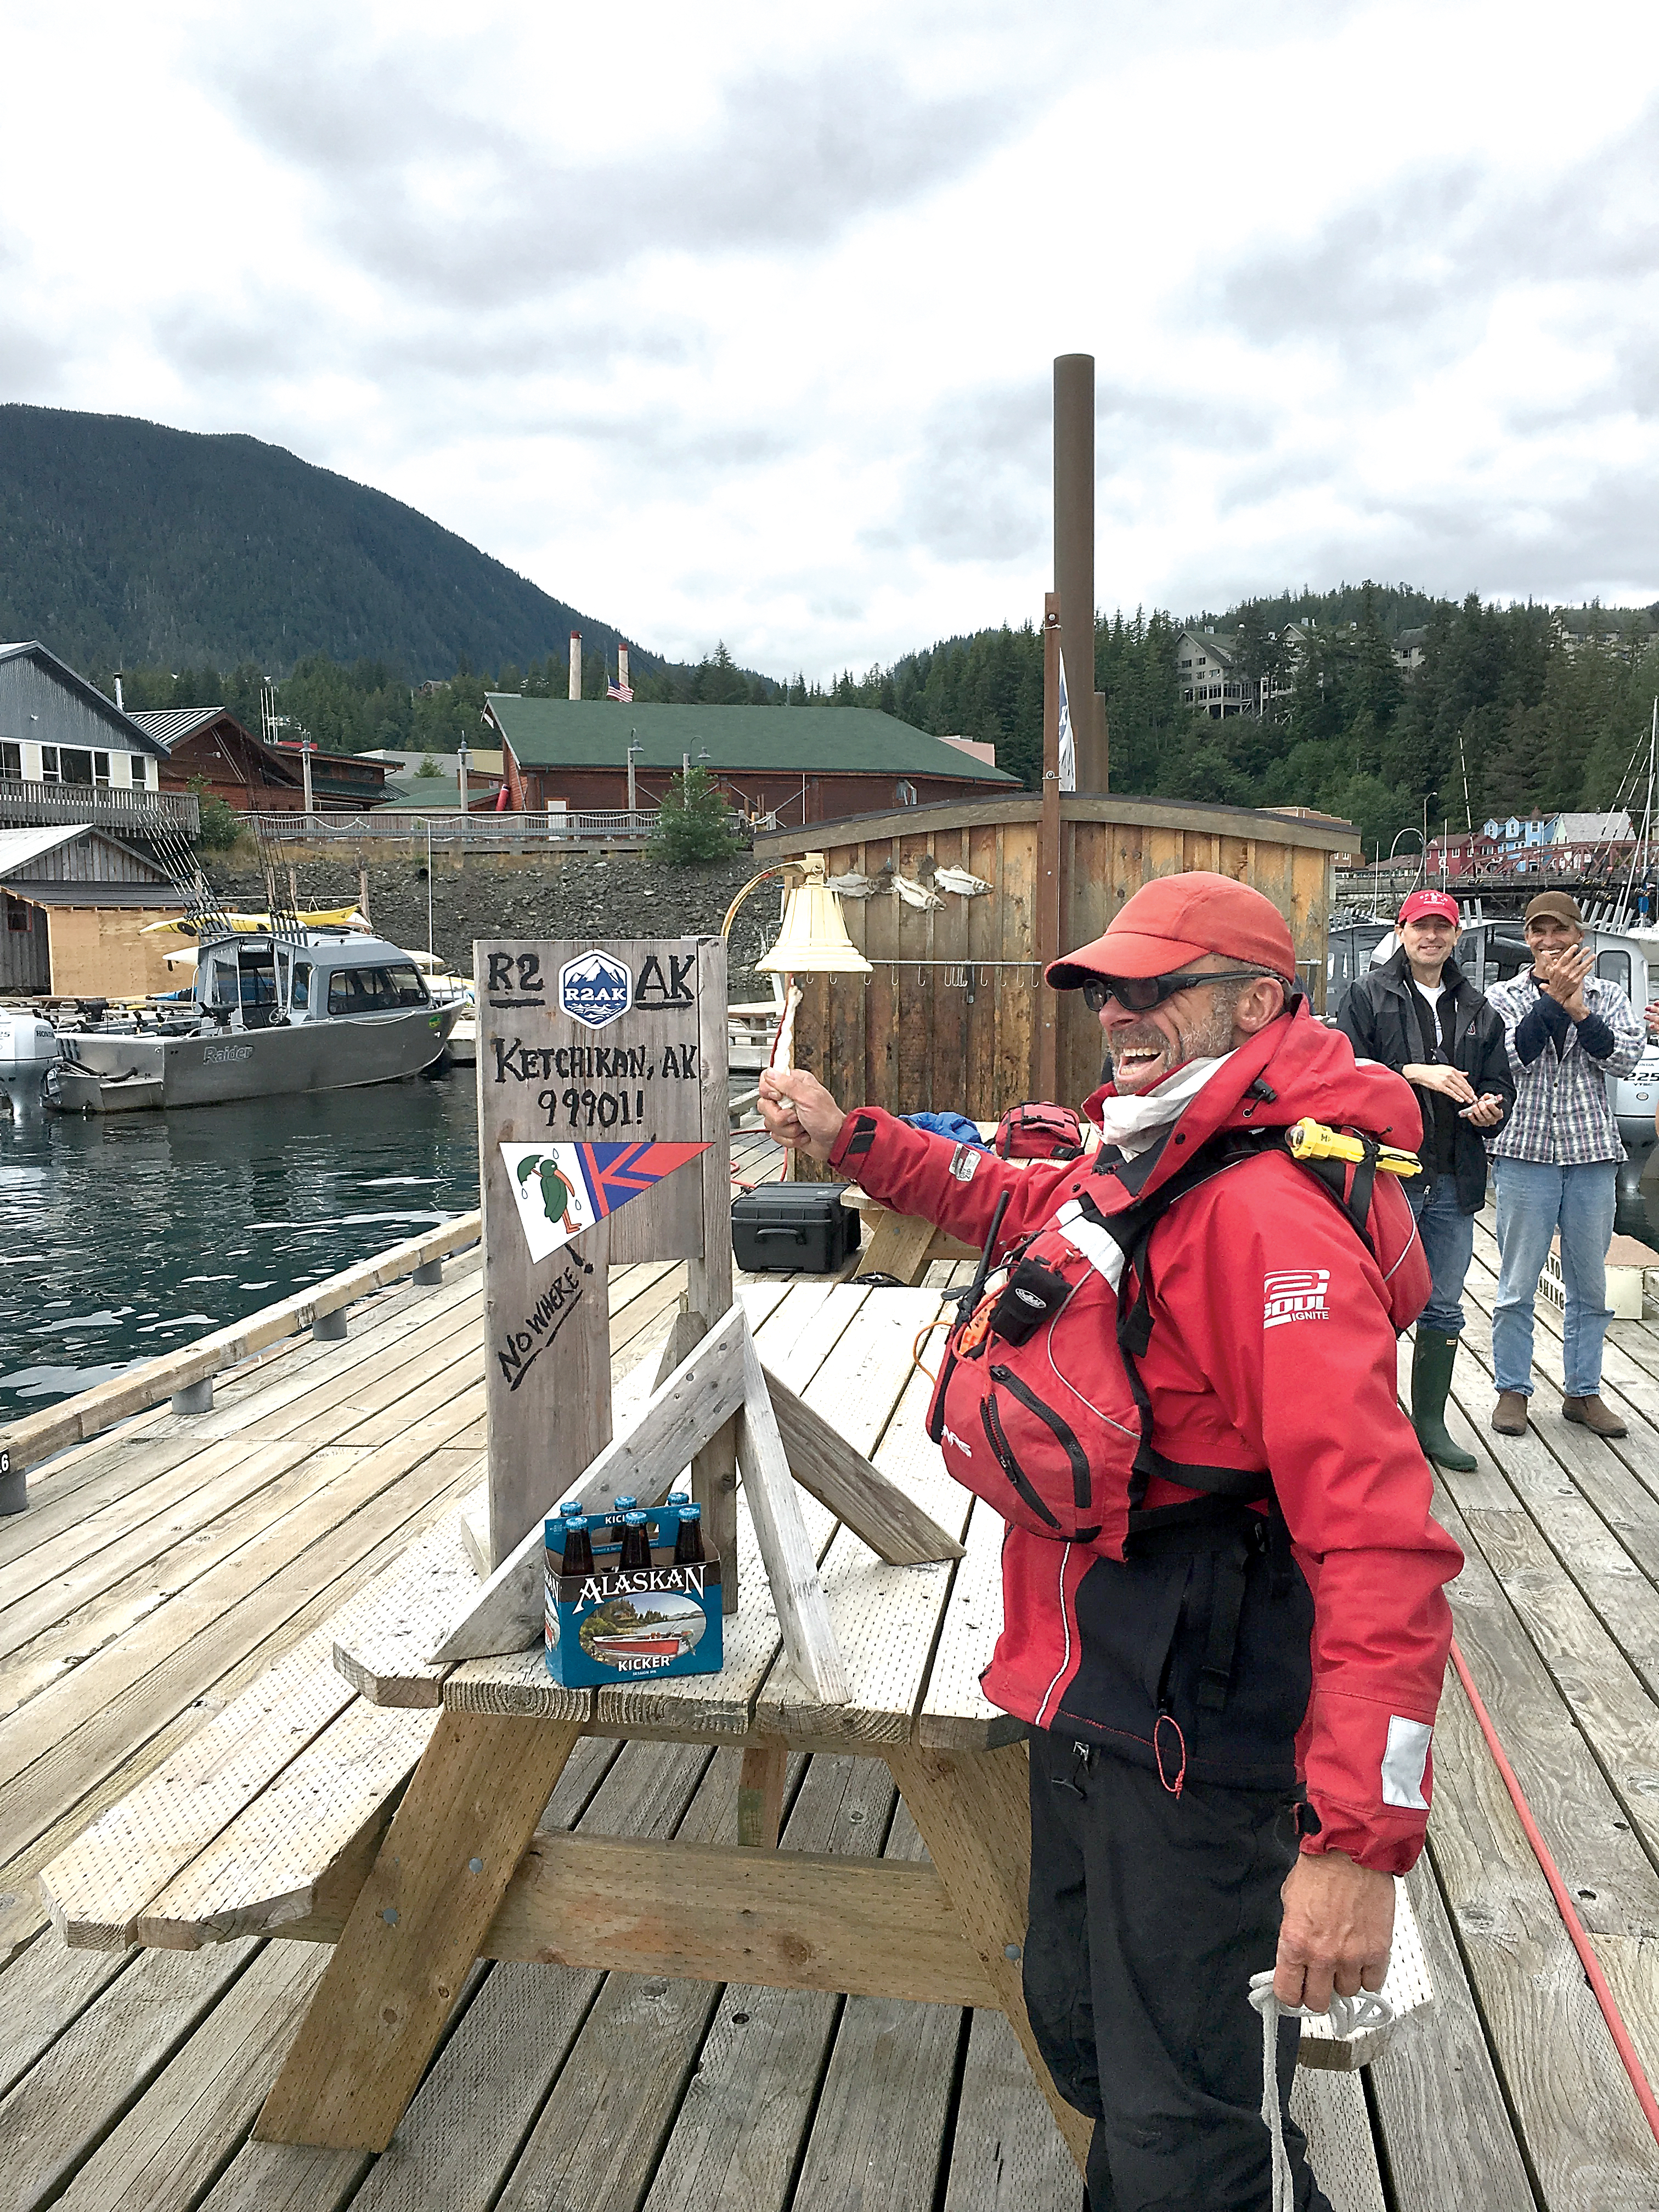 Thomas Nielsen of Team Sea Runners rings the finish bell in Ketchikan after completing the voyage from Port Townsend. — Race to Alaska ()